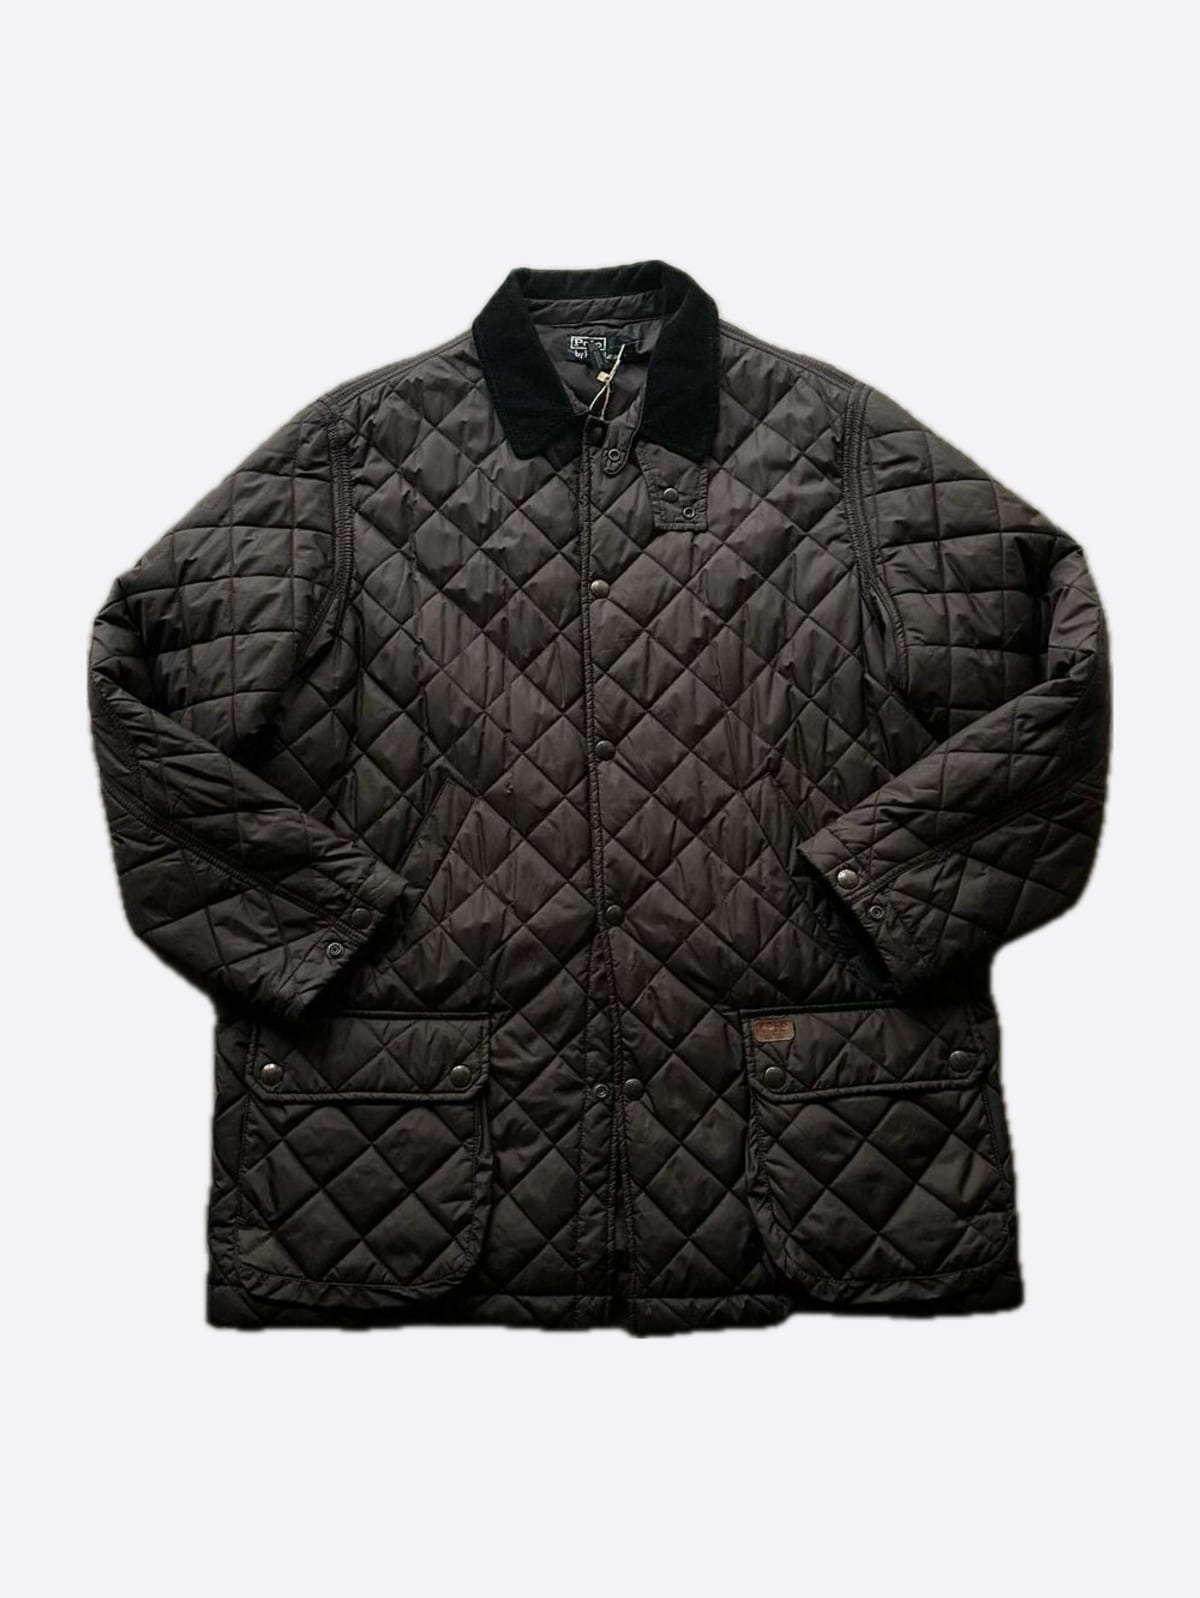 Polo Ralph Lauren Black Quilted Jacket (XL size) - With Homie 위드호미